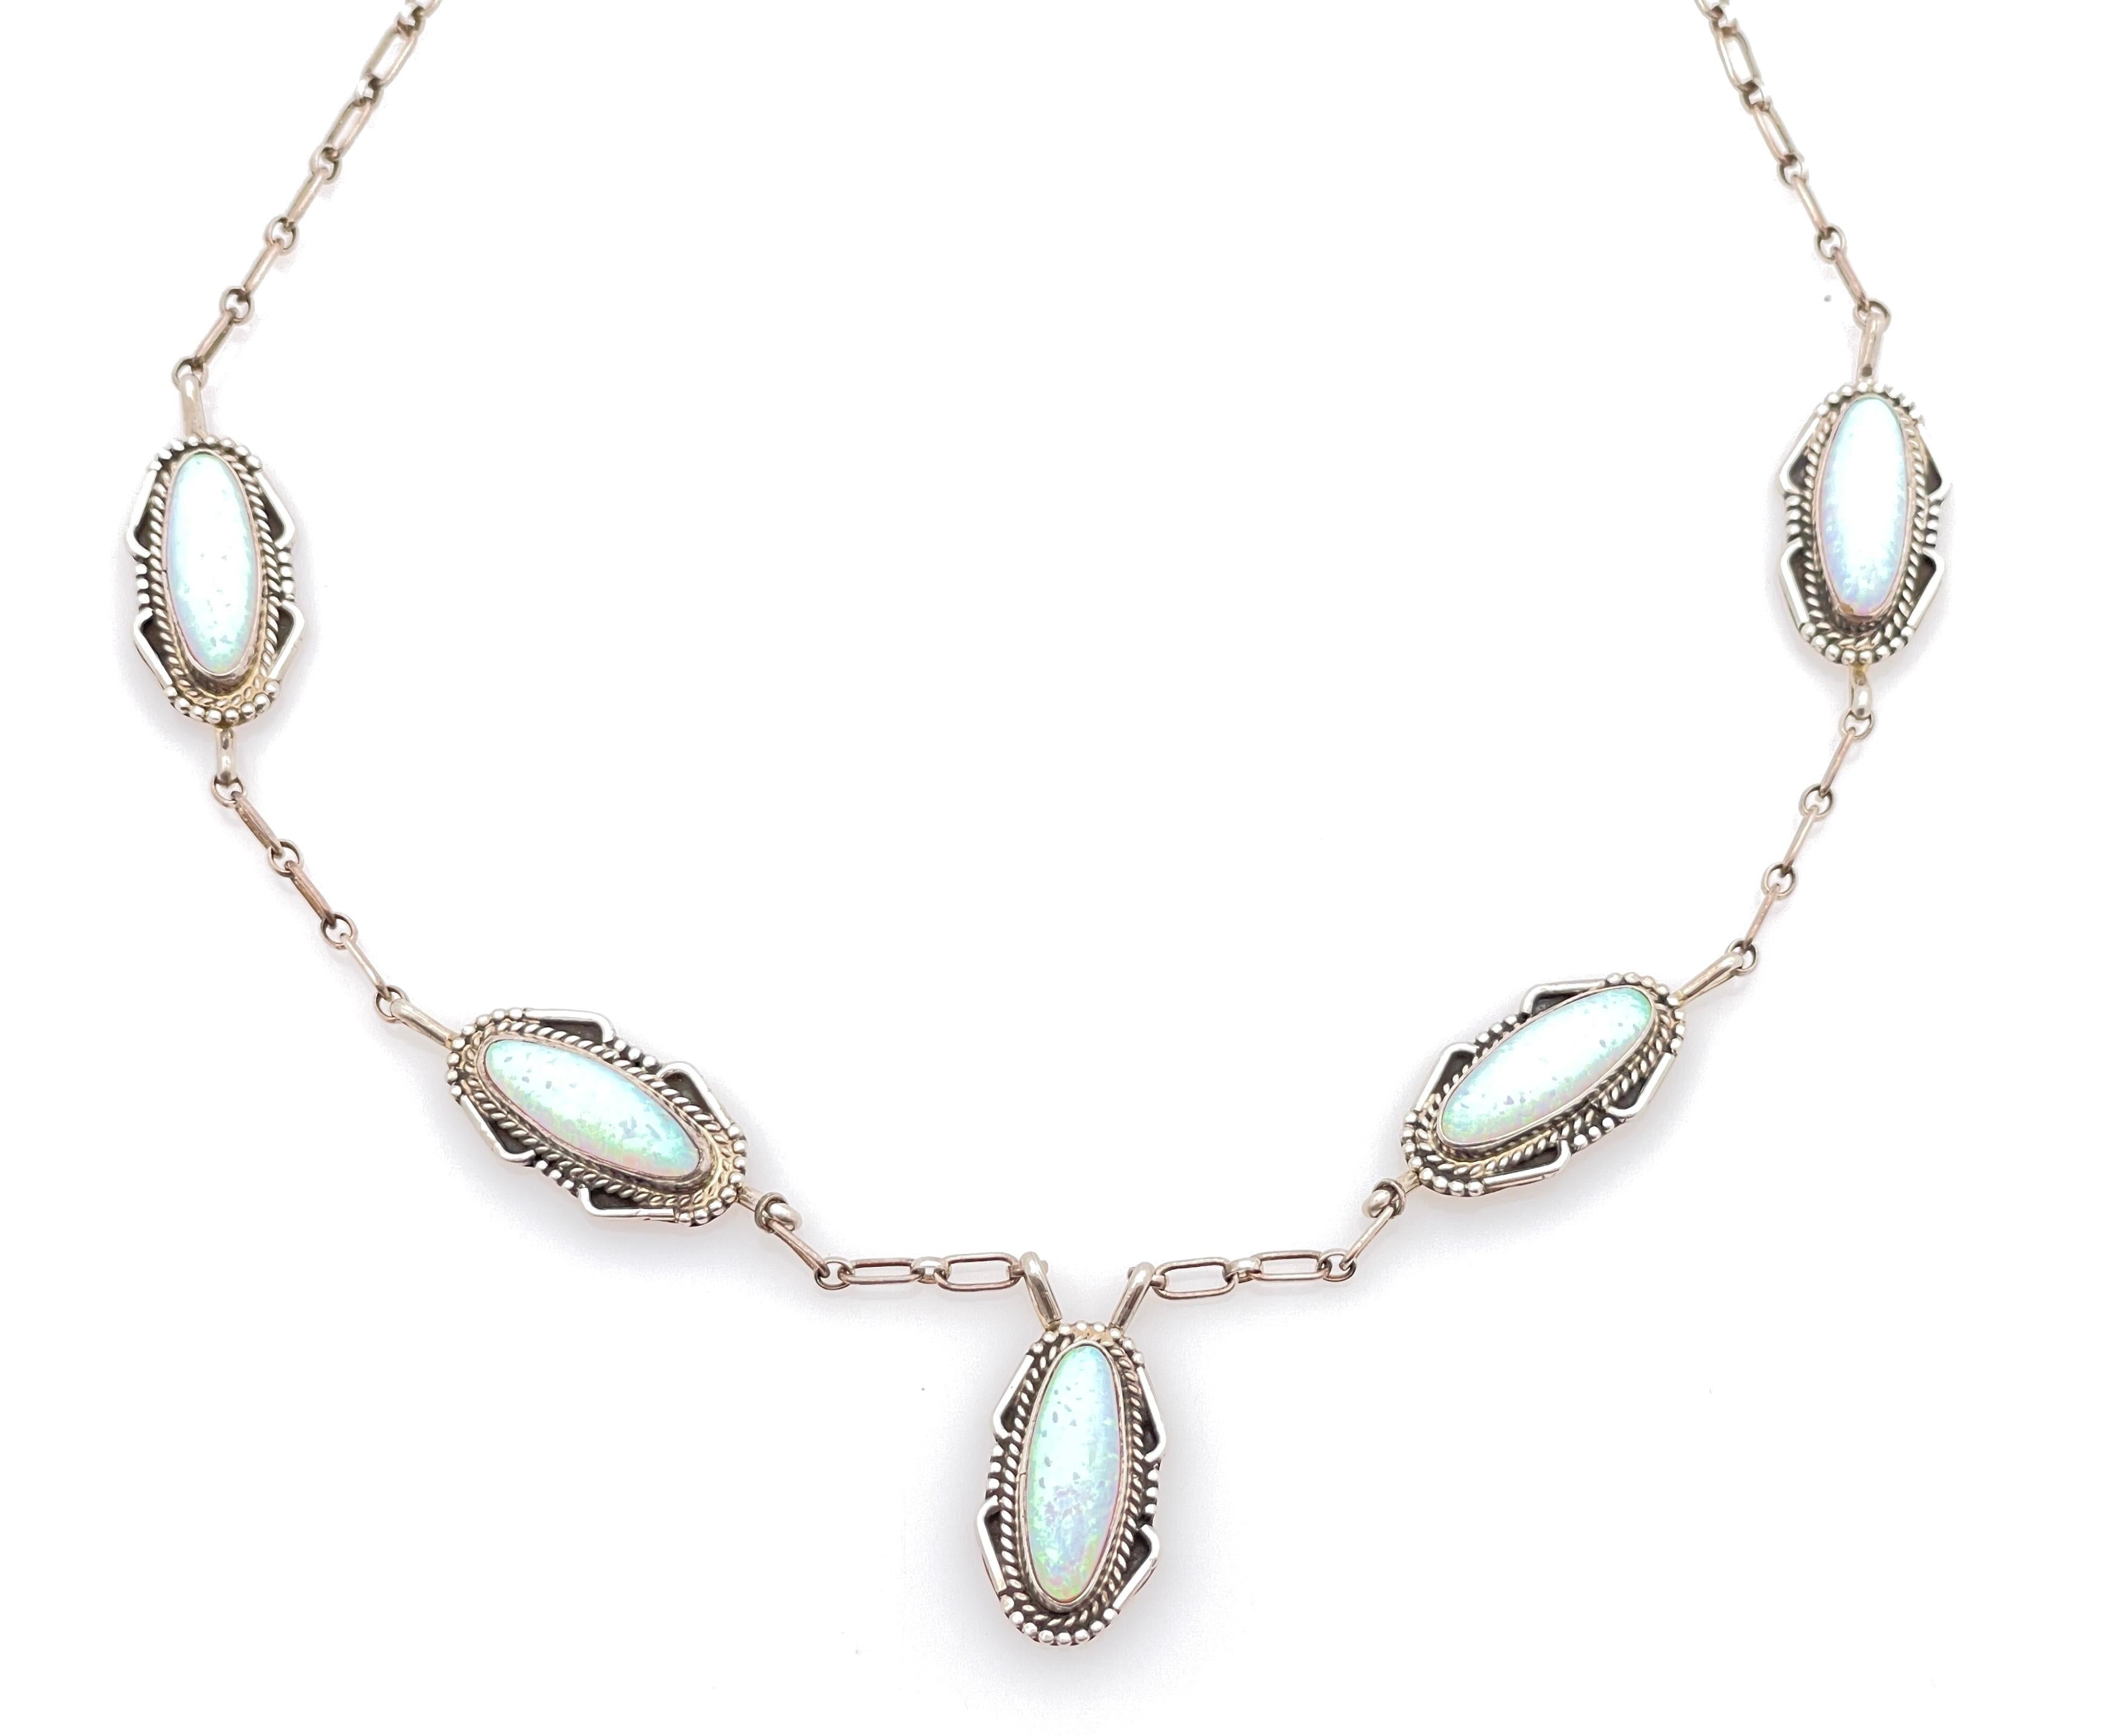 JAN MARIANO NAVAJO STERLING SILVER OPAL NECKLACE